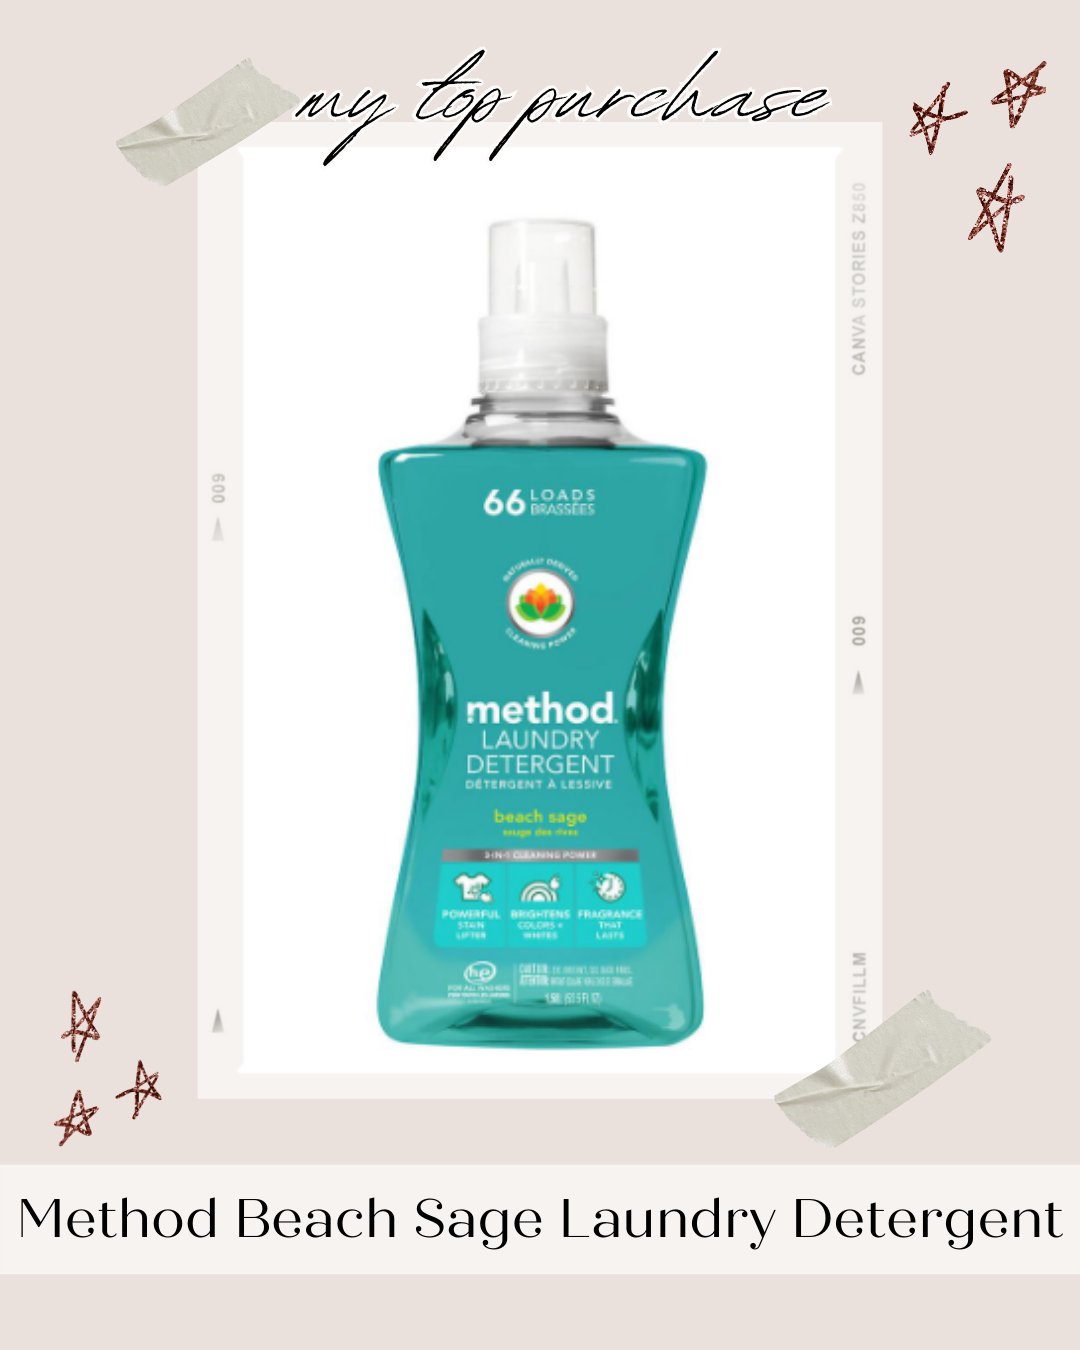 Method Beach Sage Laundry Detergent - Top 20 Purchases of 2020 - Affordable by Amanda